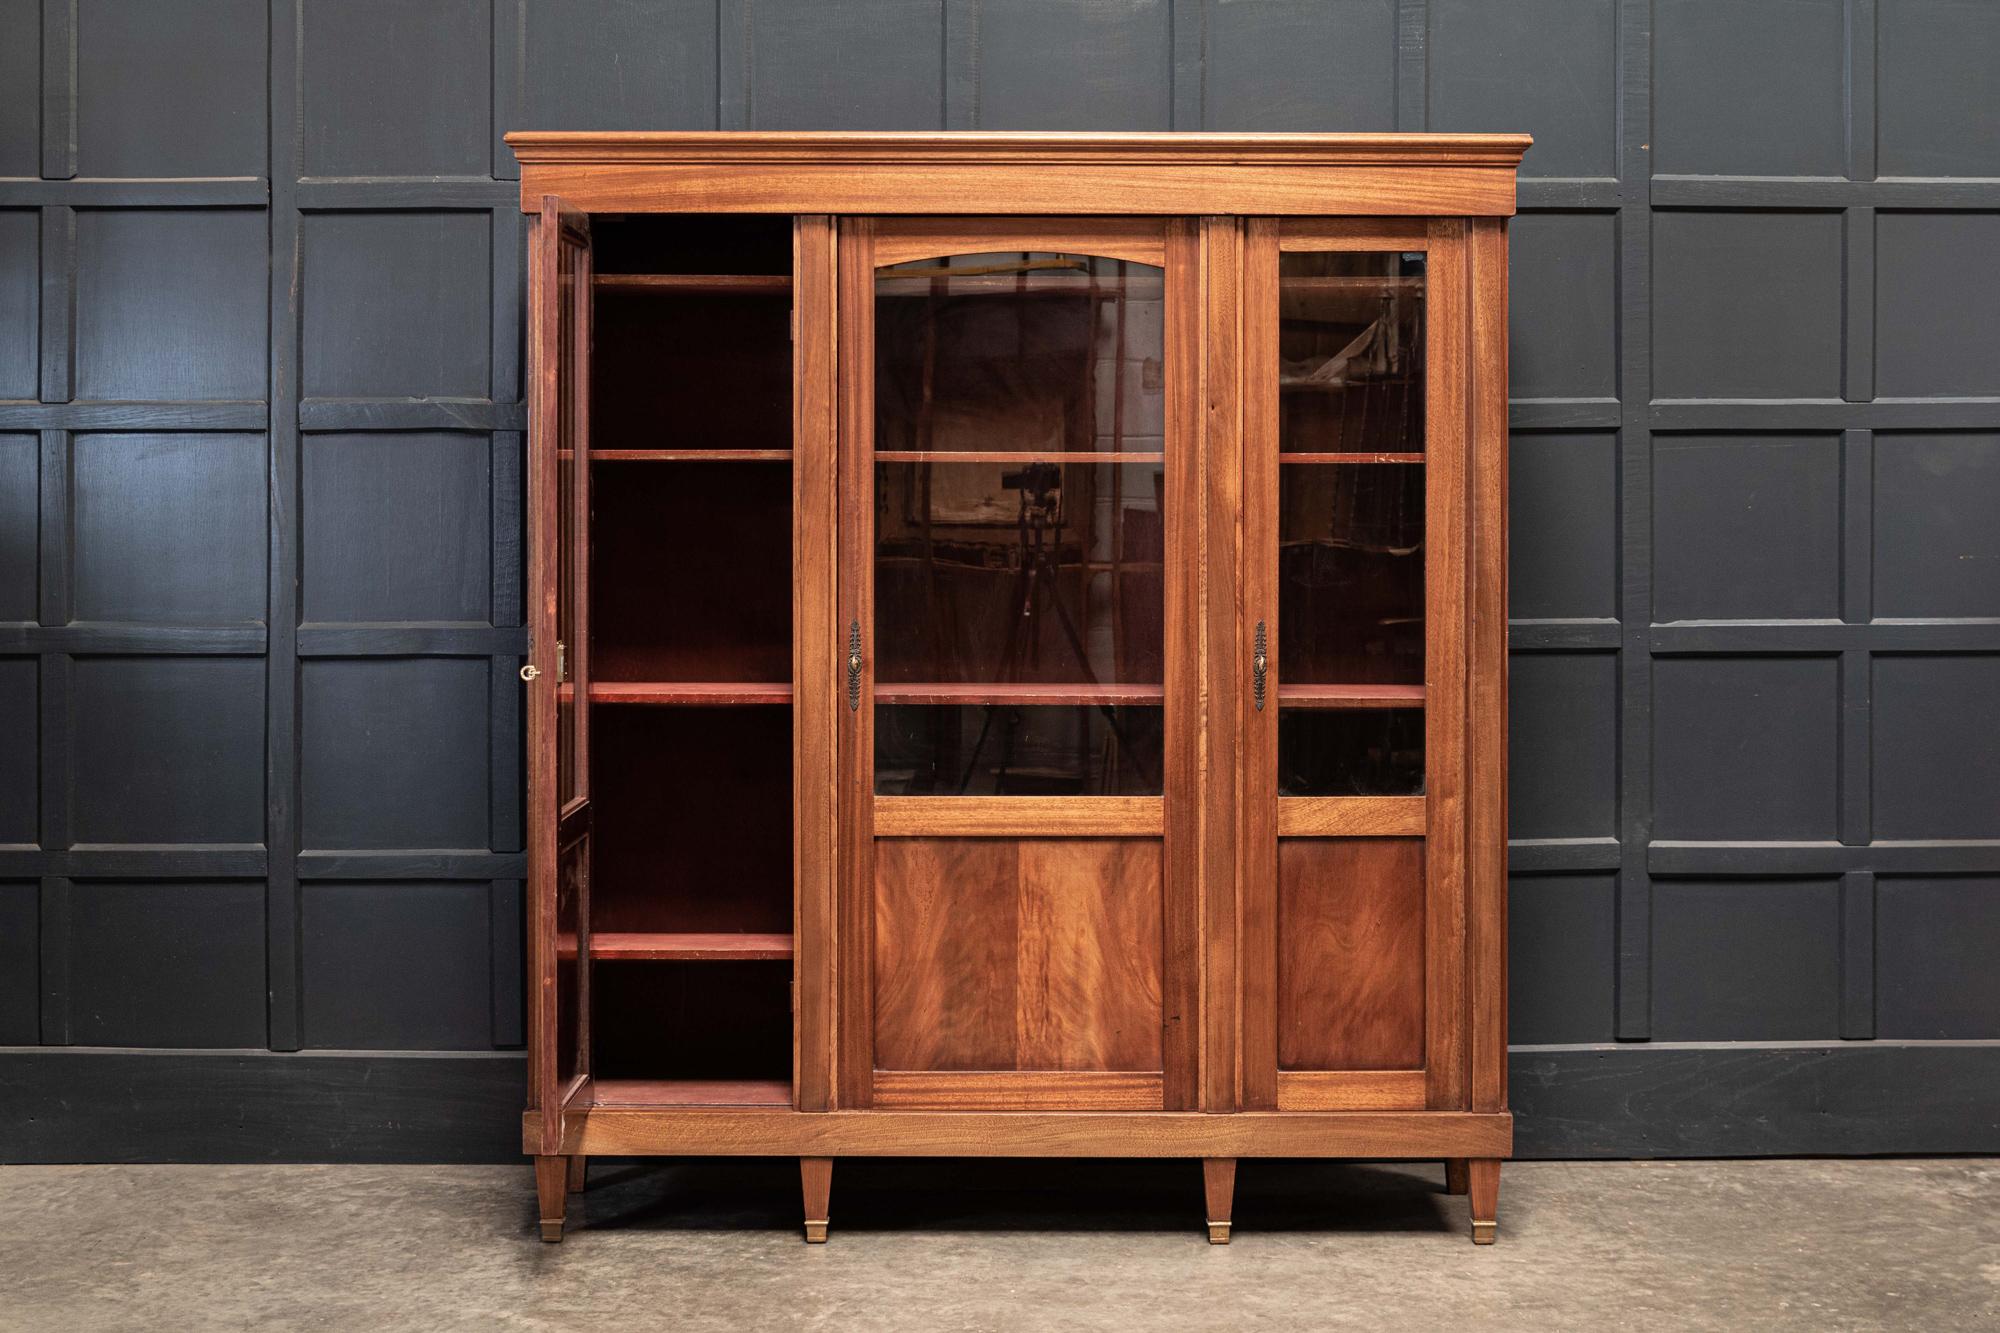 Circa 1890

19thC Large French mahogany glazed vitrine / bookcase / armoire

With original hardware, keys and brass feet

Sourced from the South of France

Measures: W 167 x D 39 x H 179.5cm.
 
 